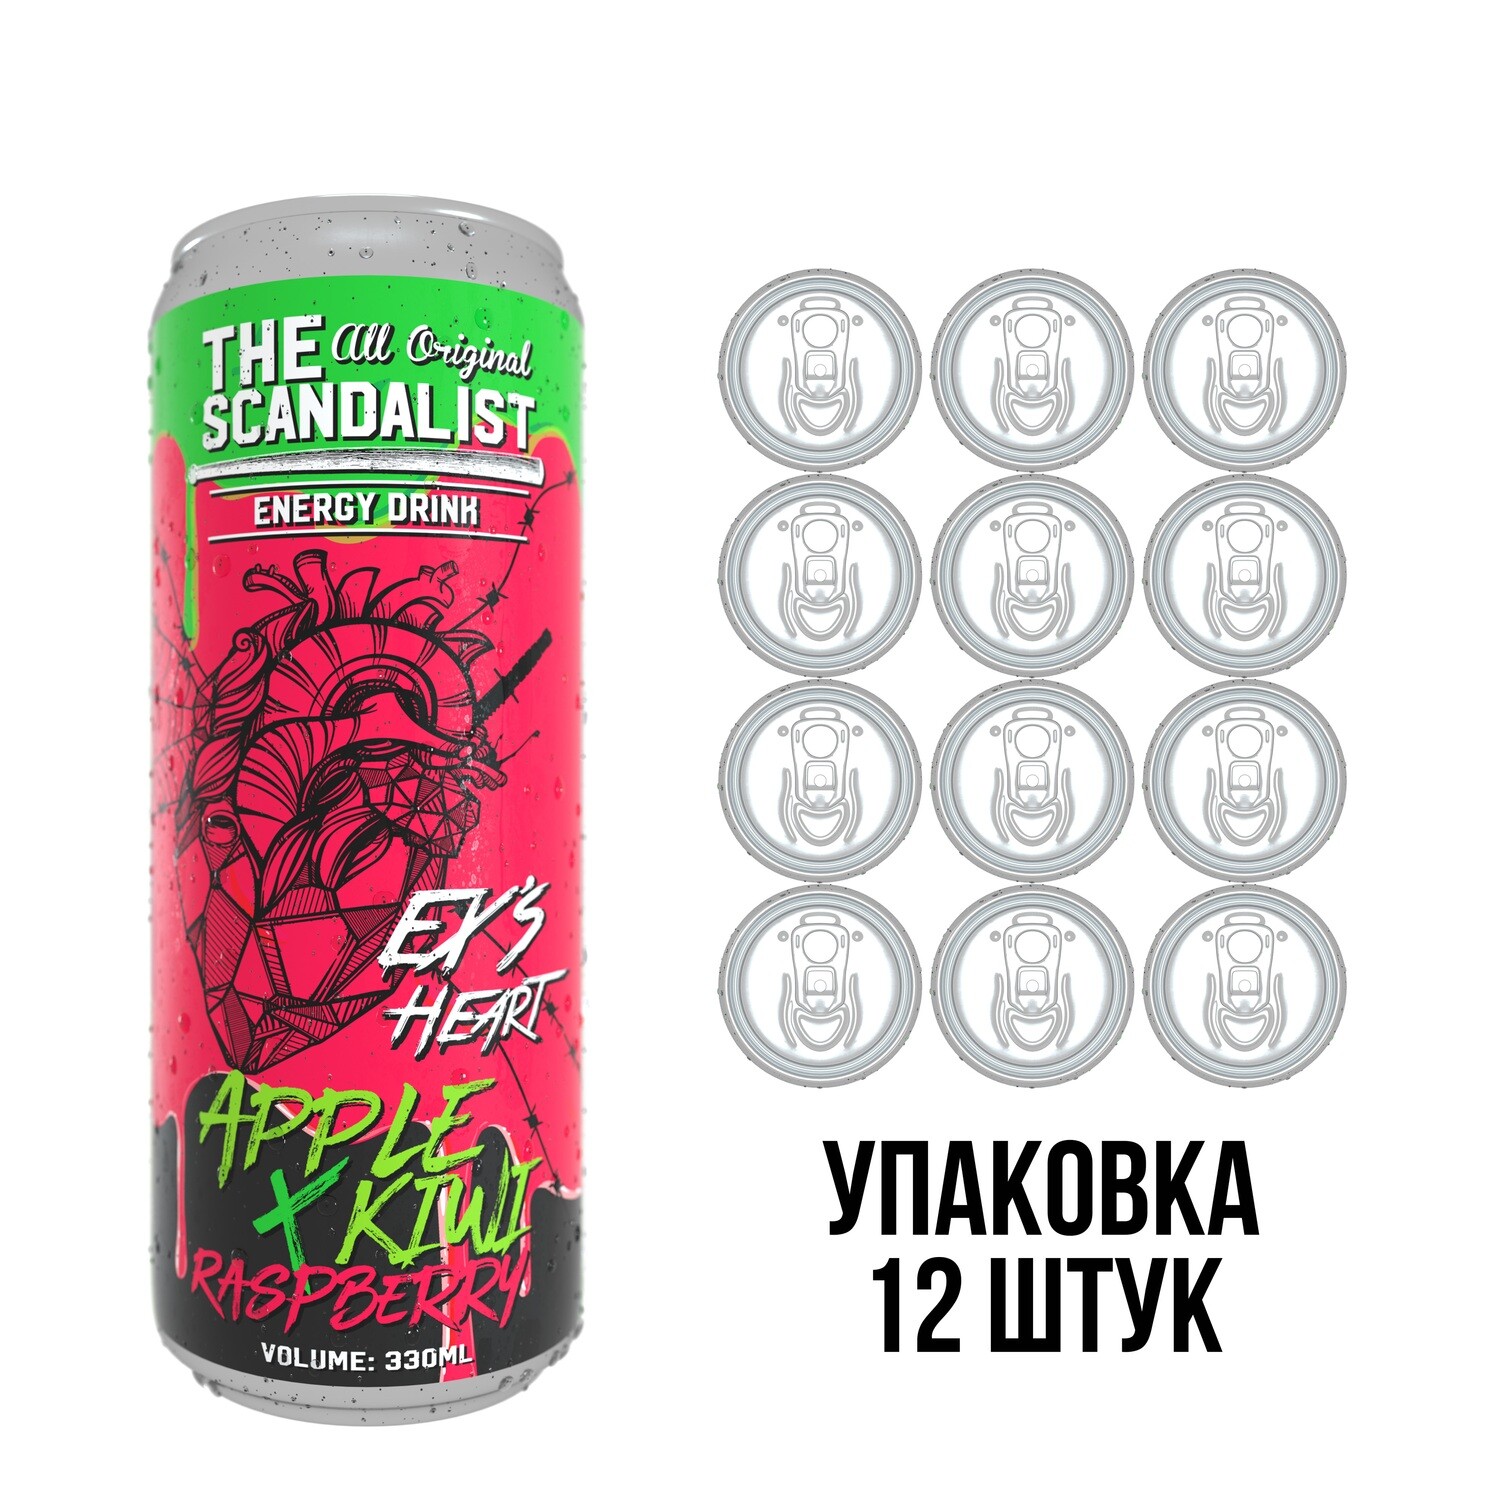 12-Pack The Scandalist Energy Drink "Ex's Heart"